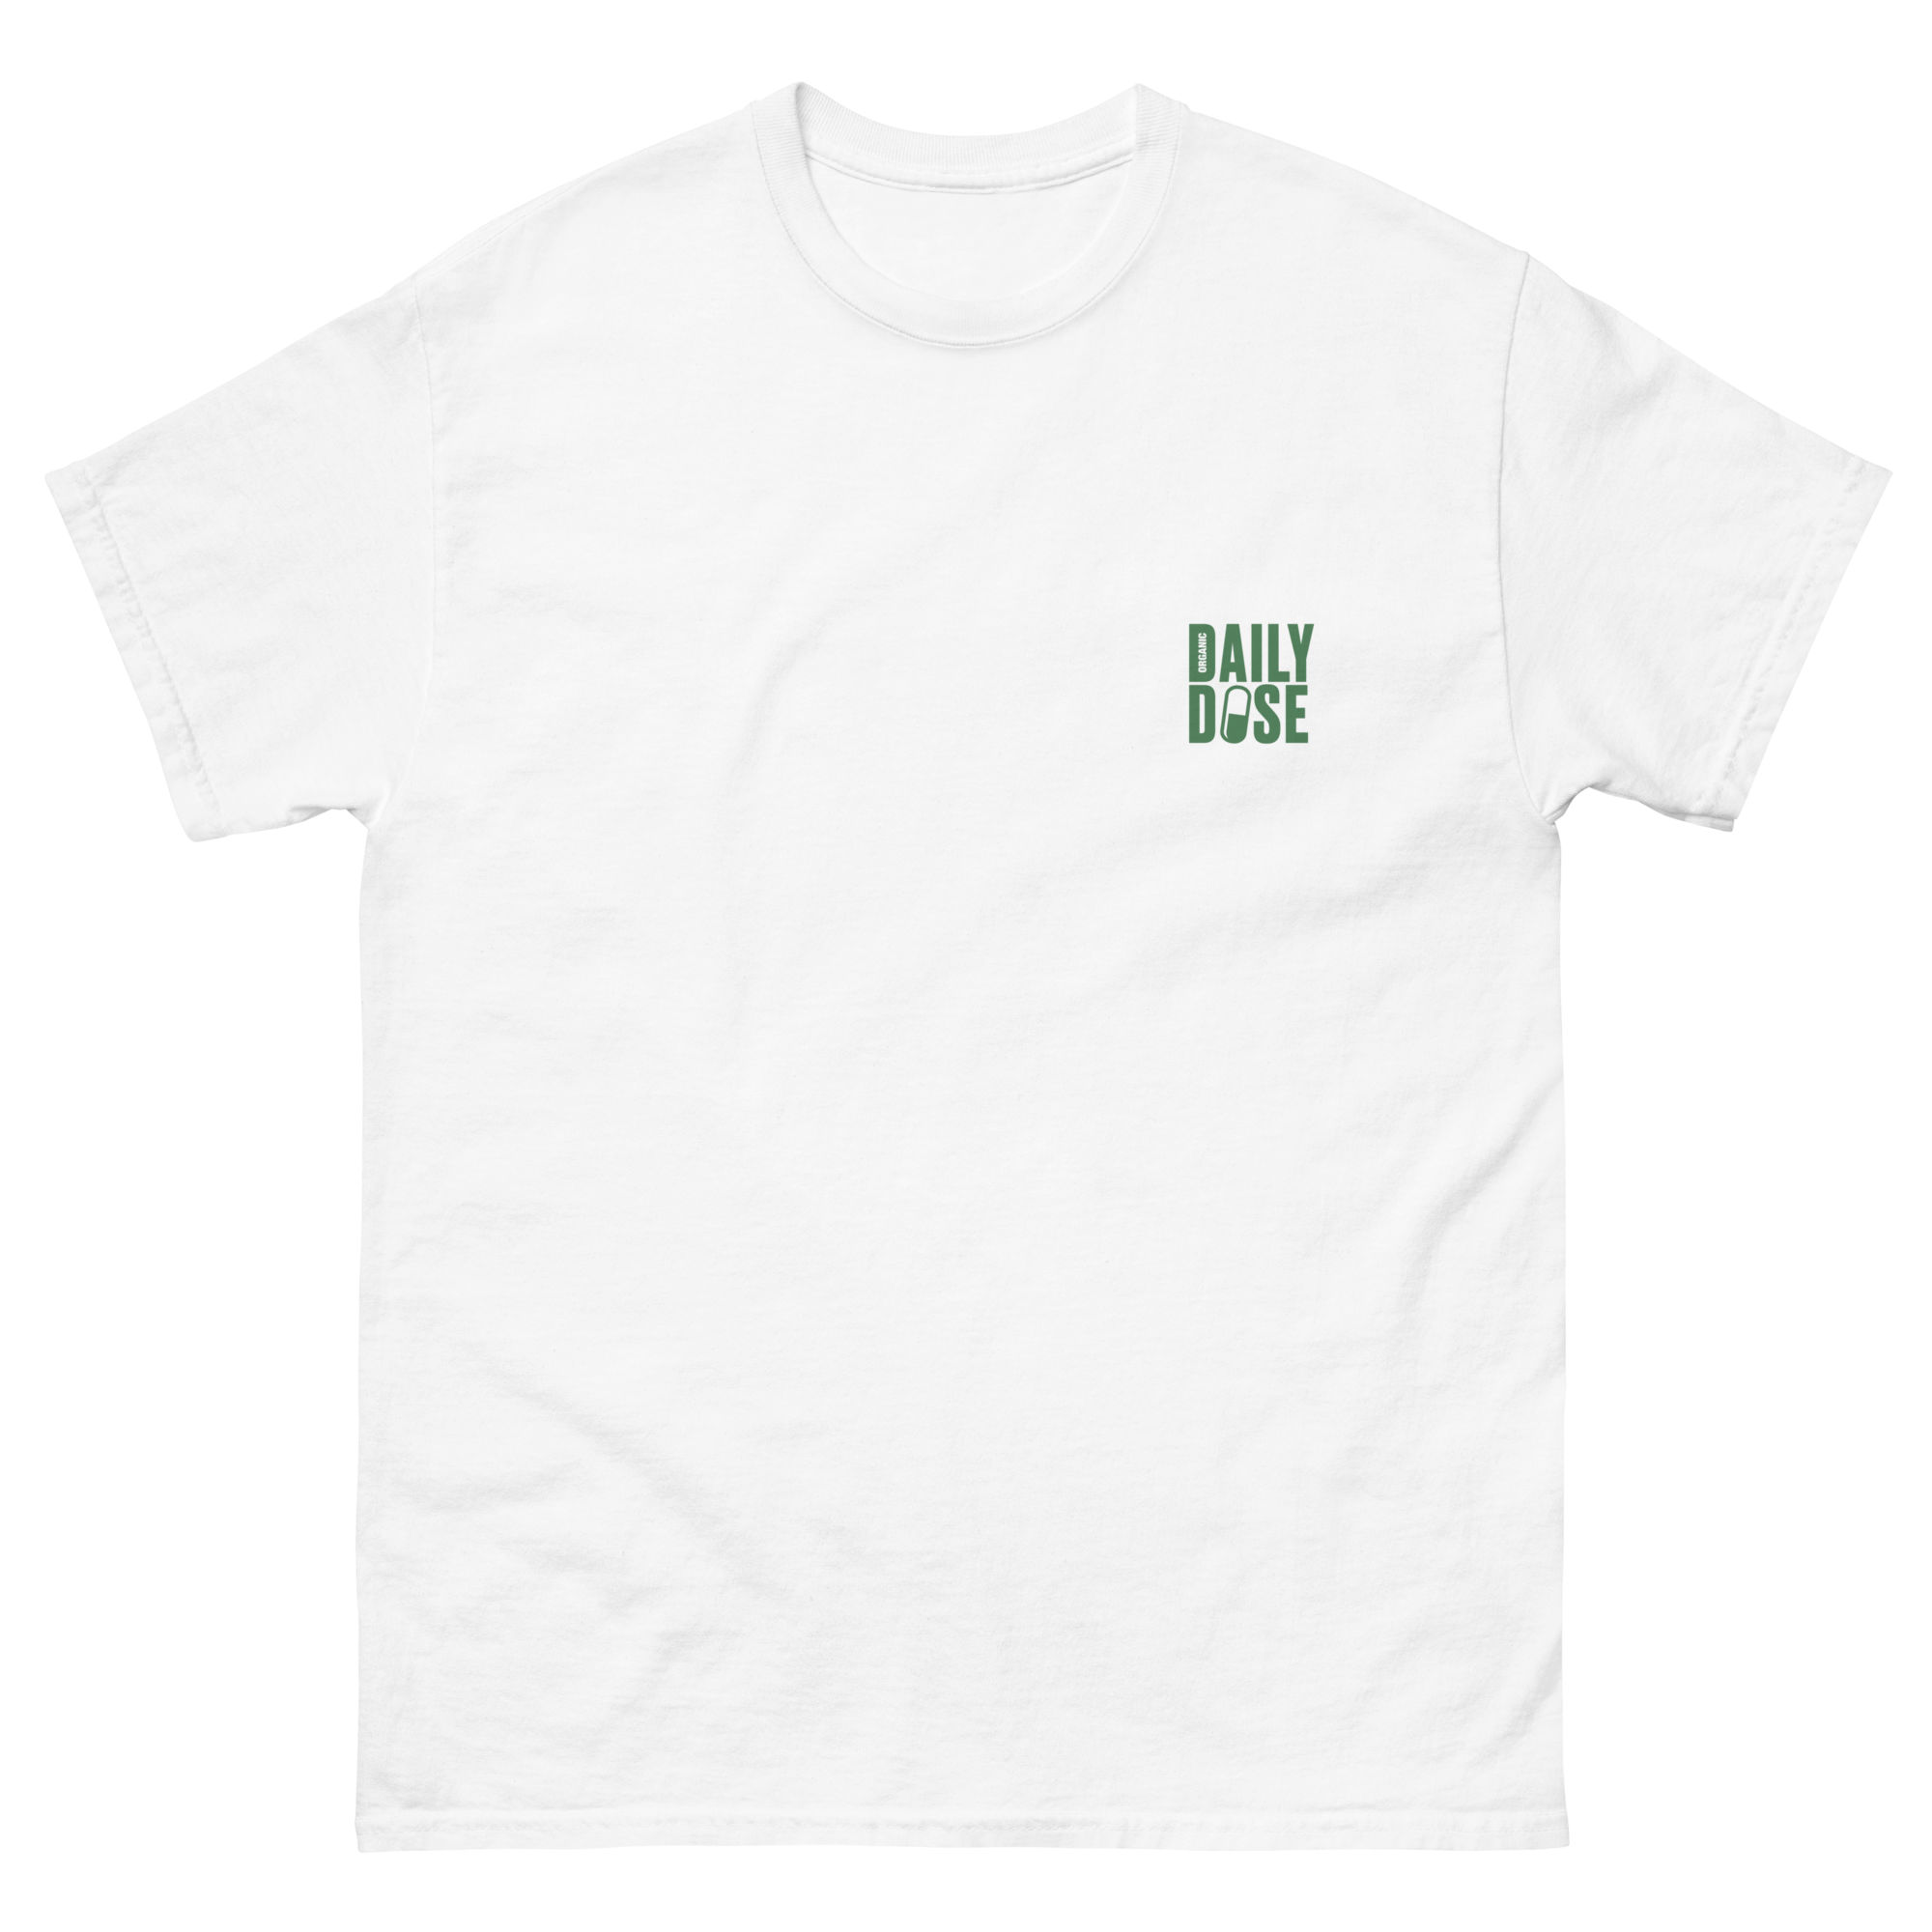 mens classic tee white front aquarelle - Daily Dose